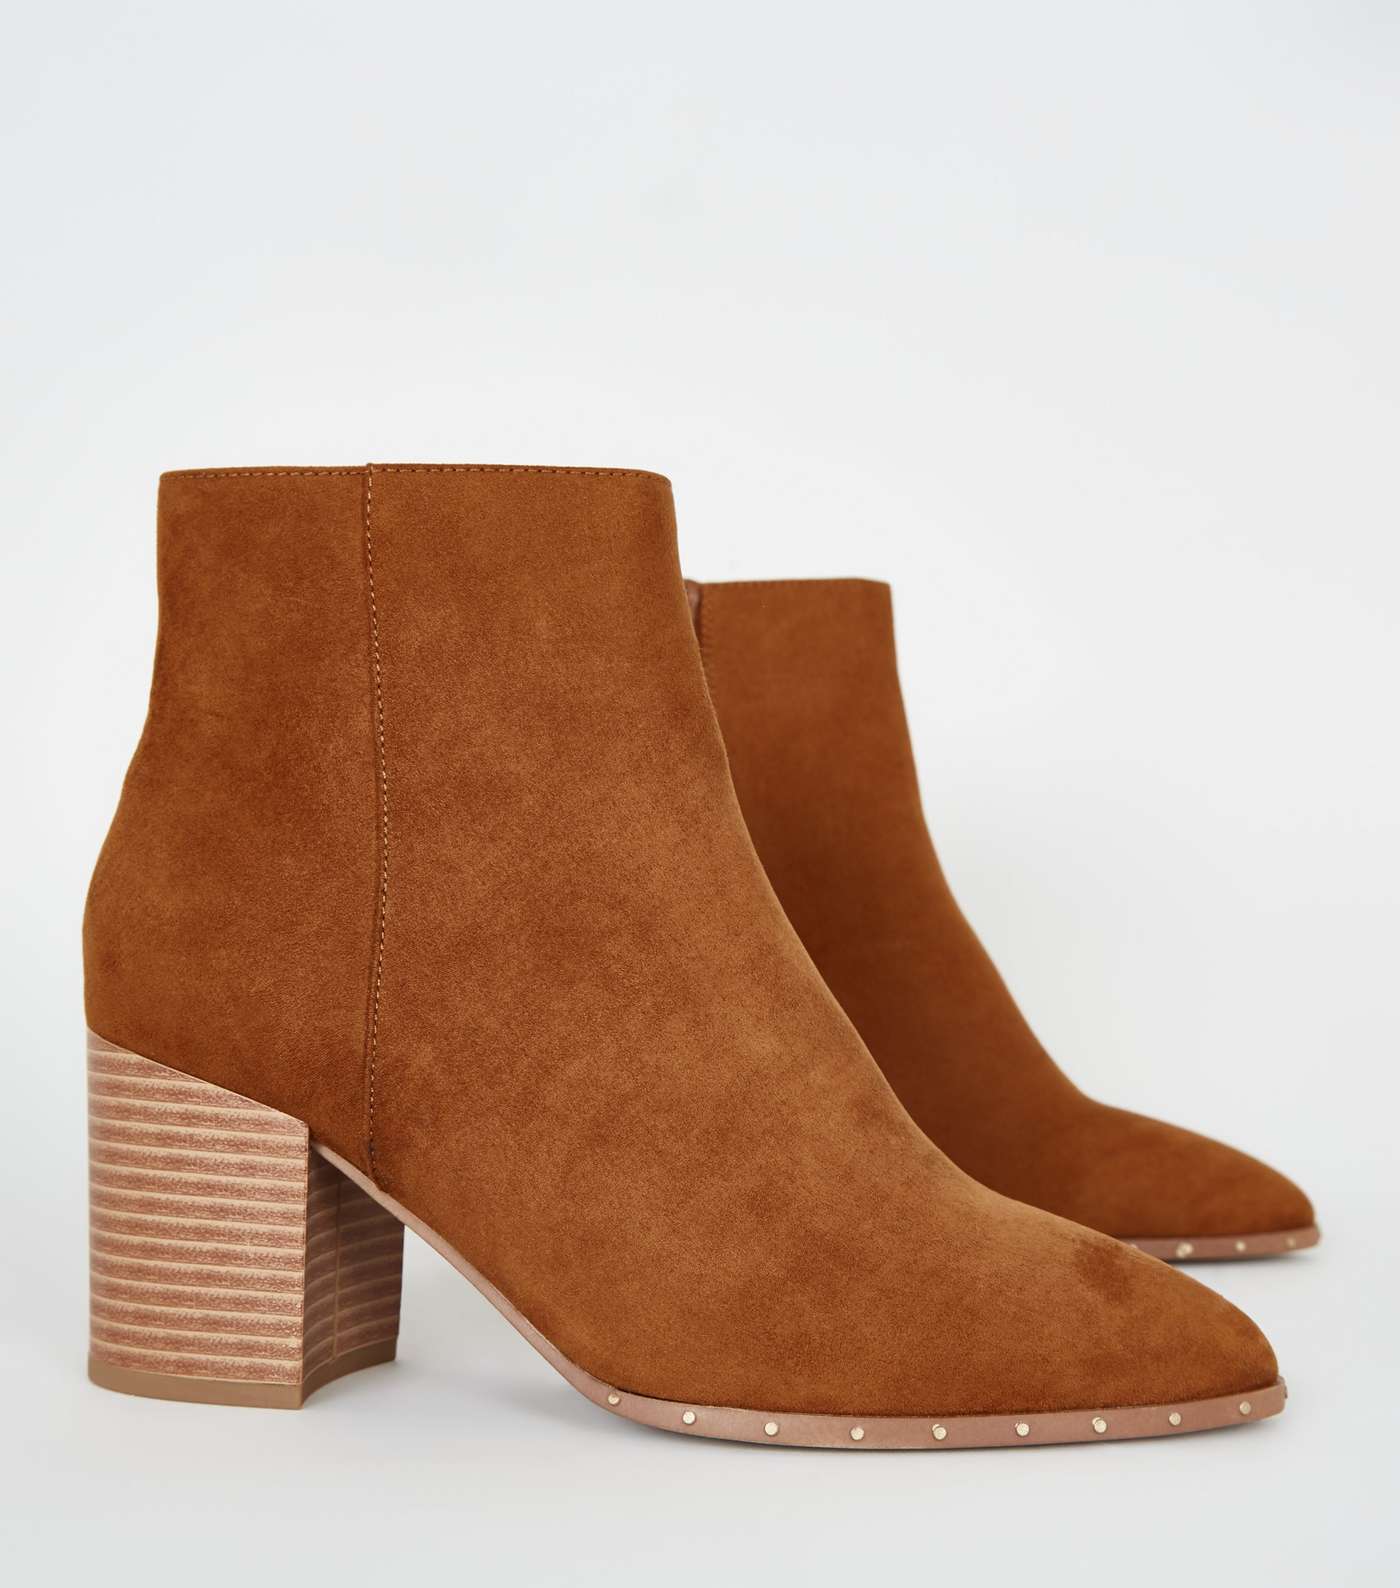 Tan Suedette Stud Heeled Ankle Boots Image 4